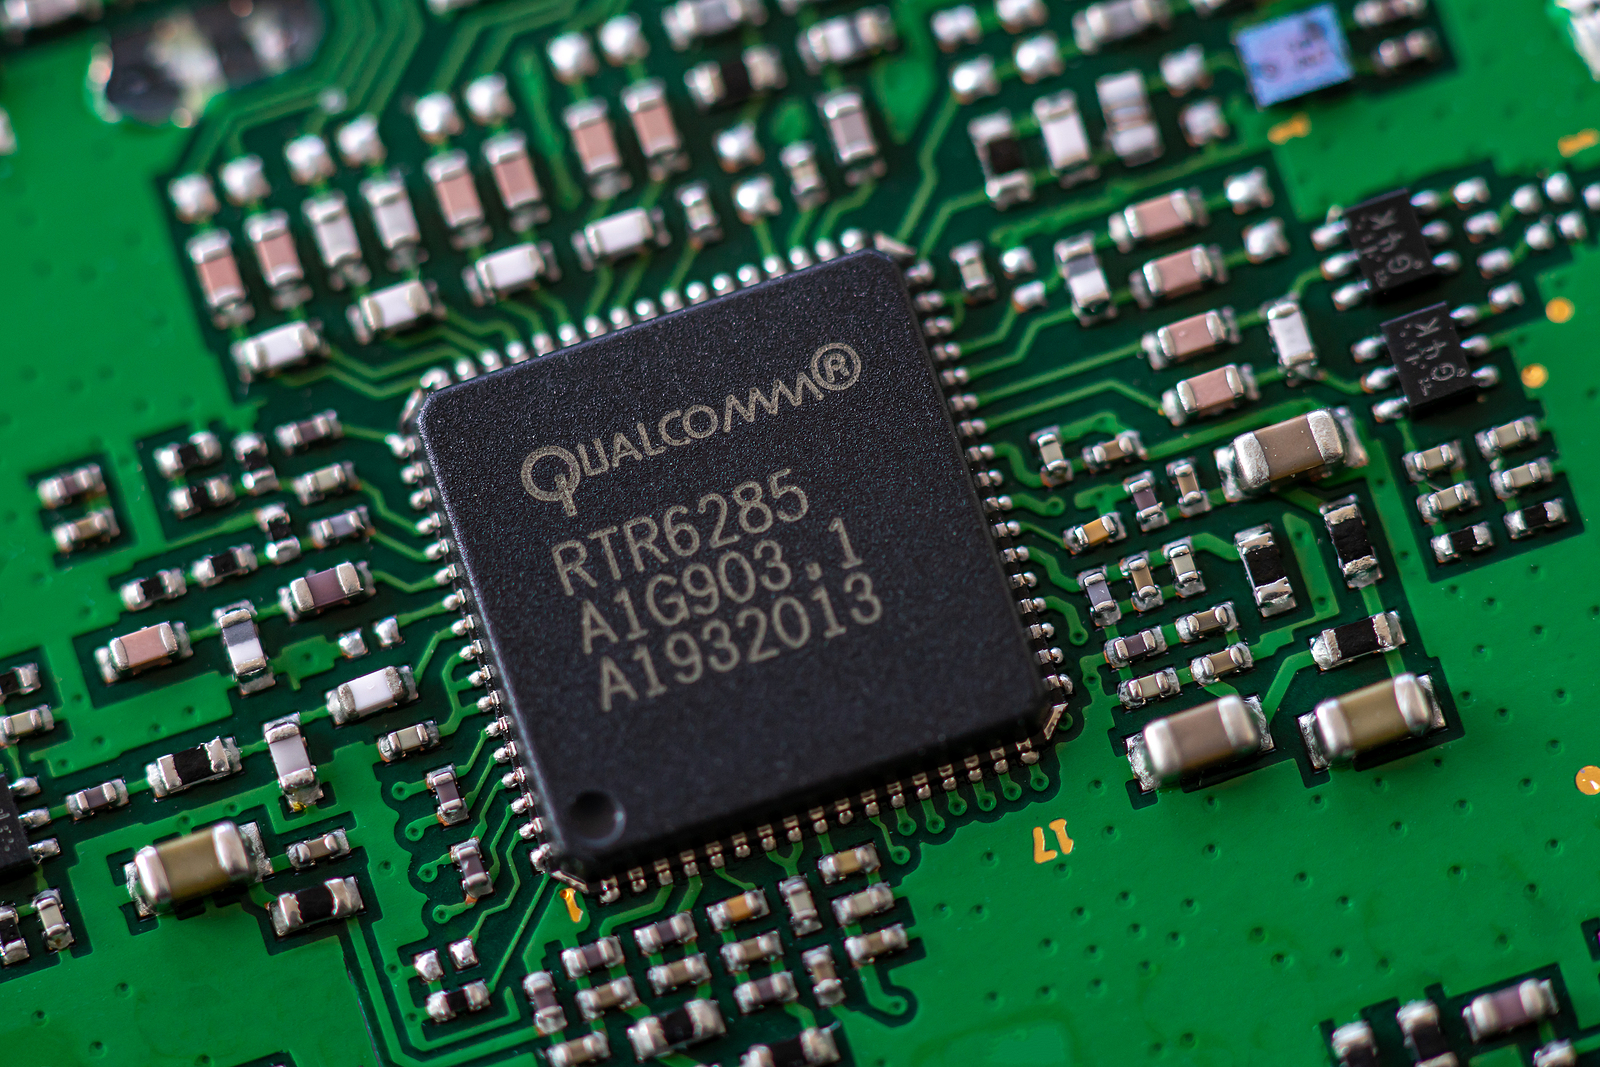 Qualcomm Patches 3 Zero-Days Reported by Google – Source: www.securityweek.com